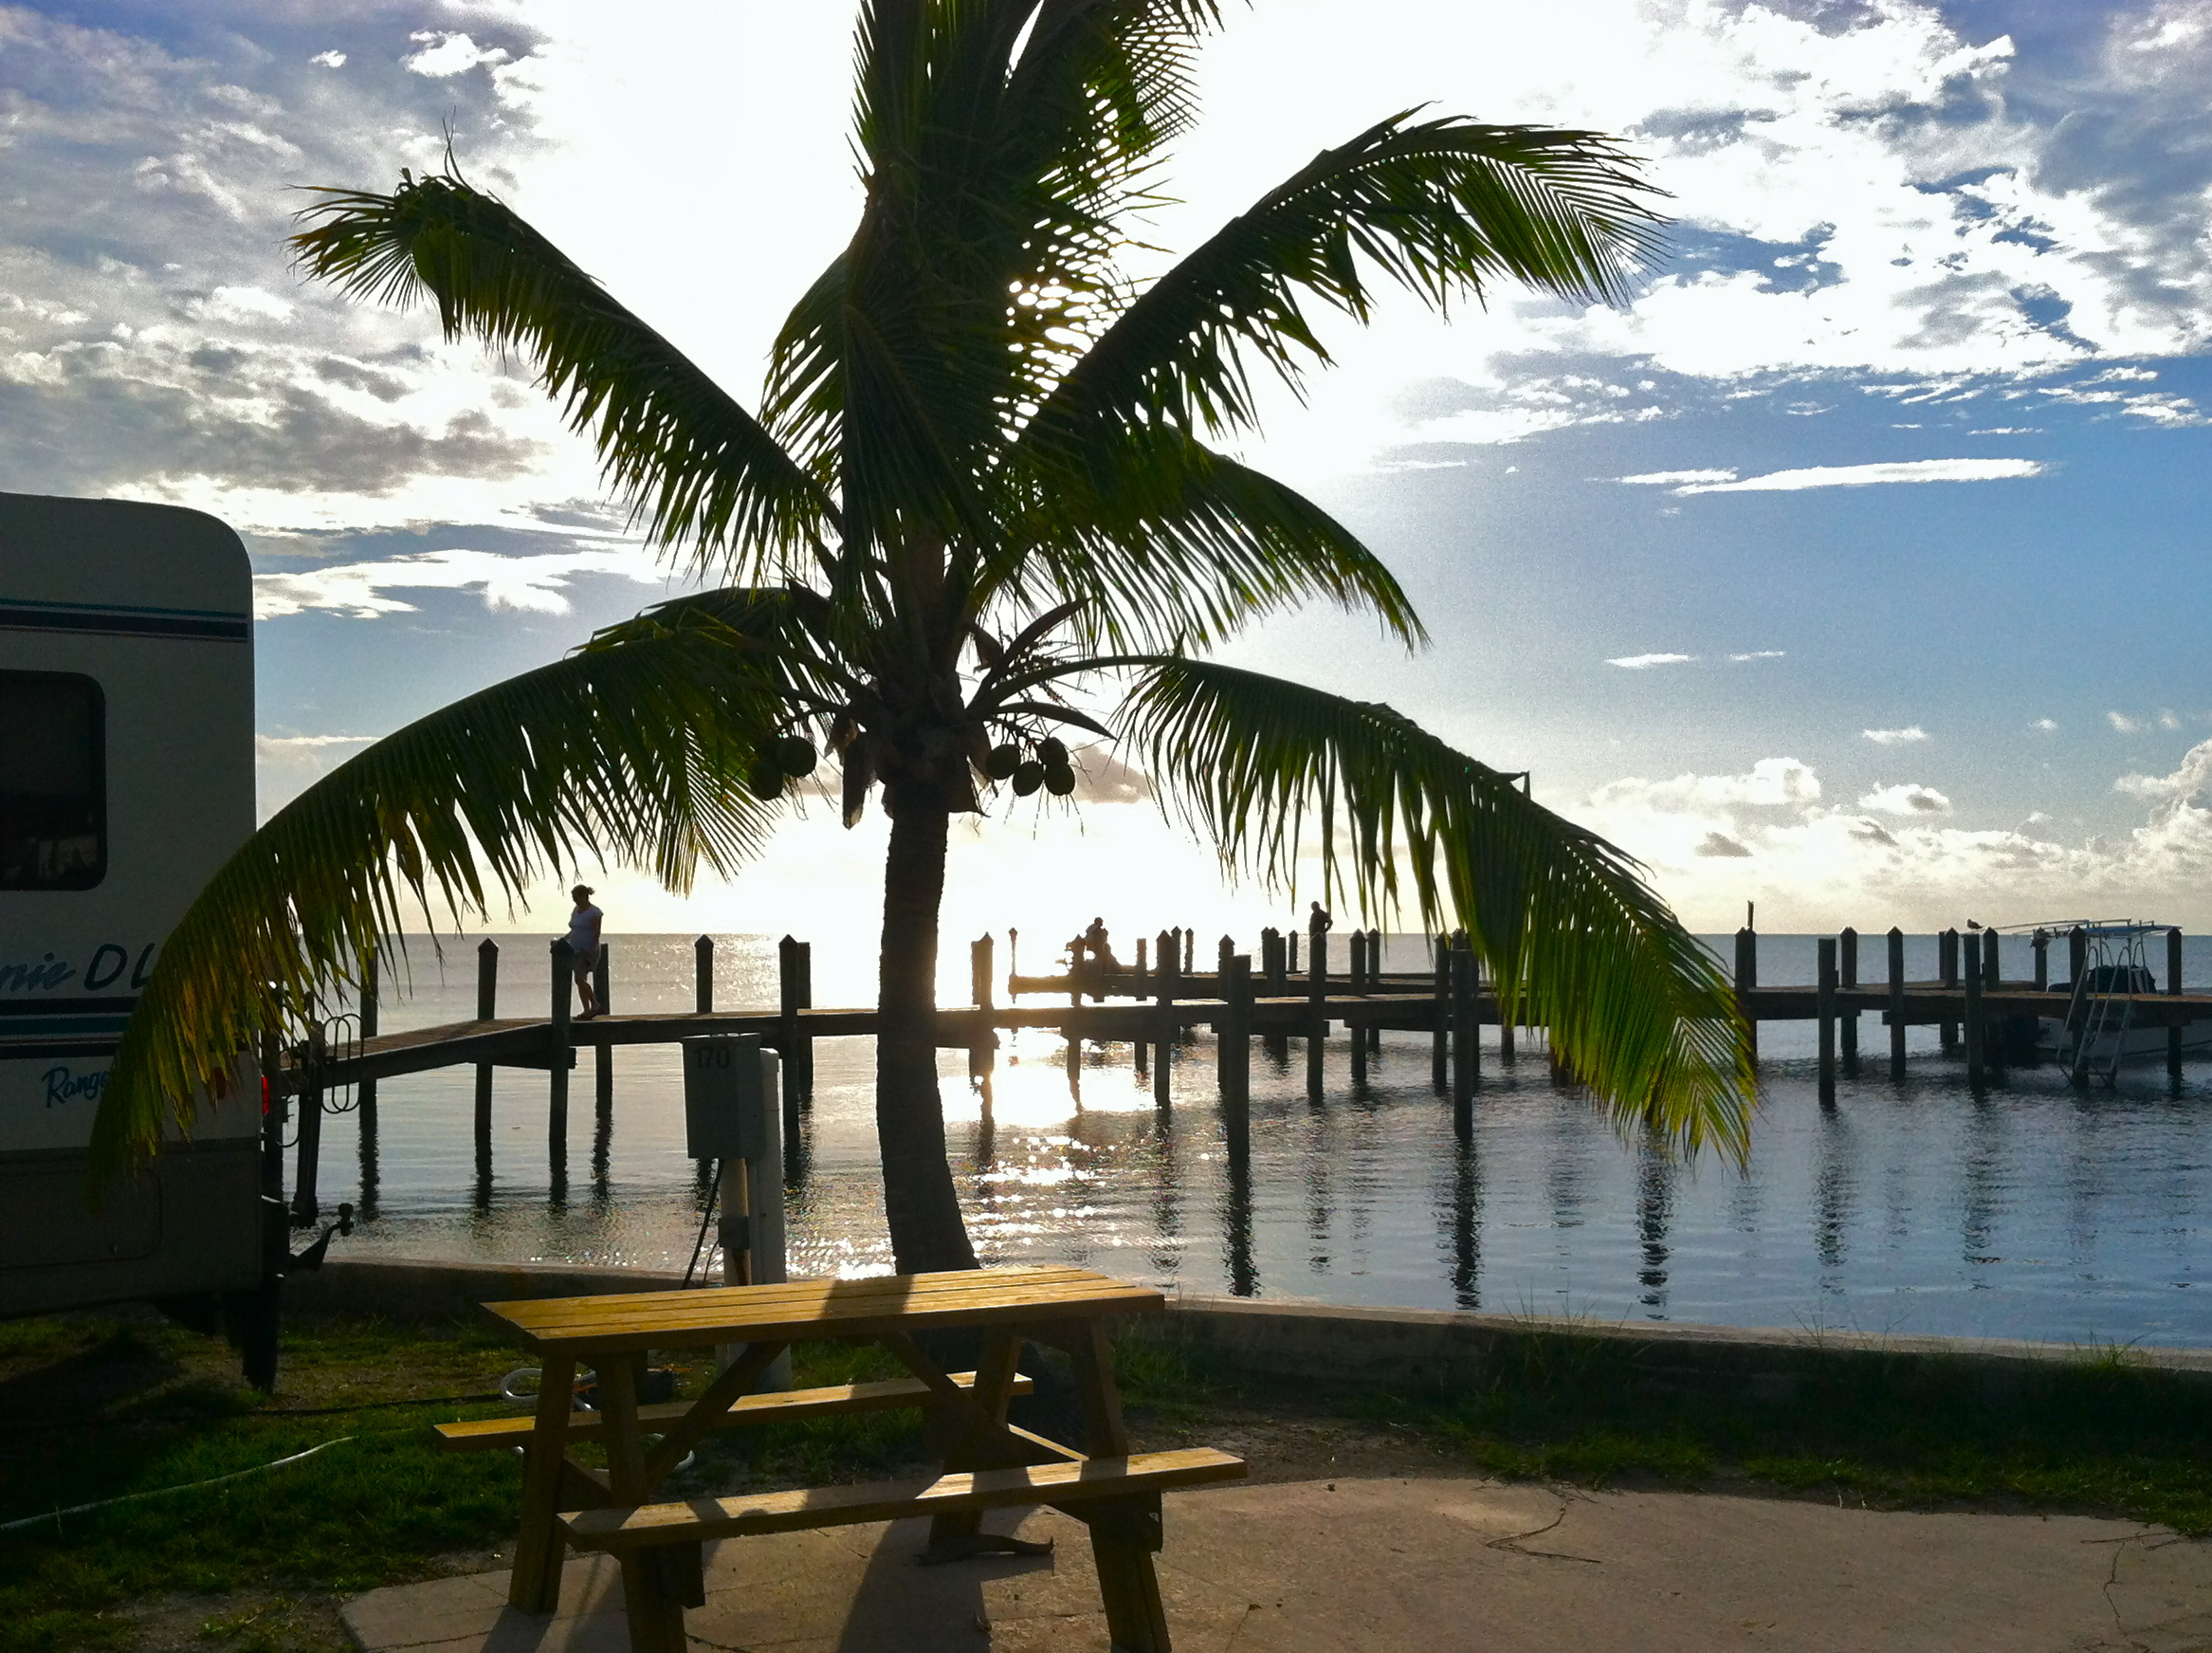 The sun hangs over the horizon of an RV park with a palm tree in the foreground and an angler standing on a pier.